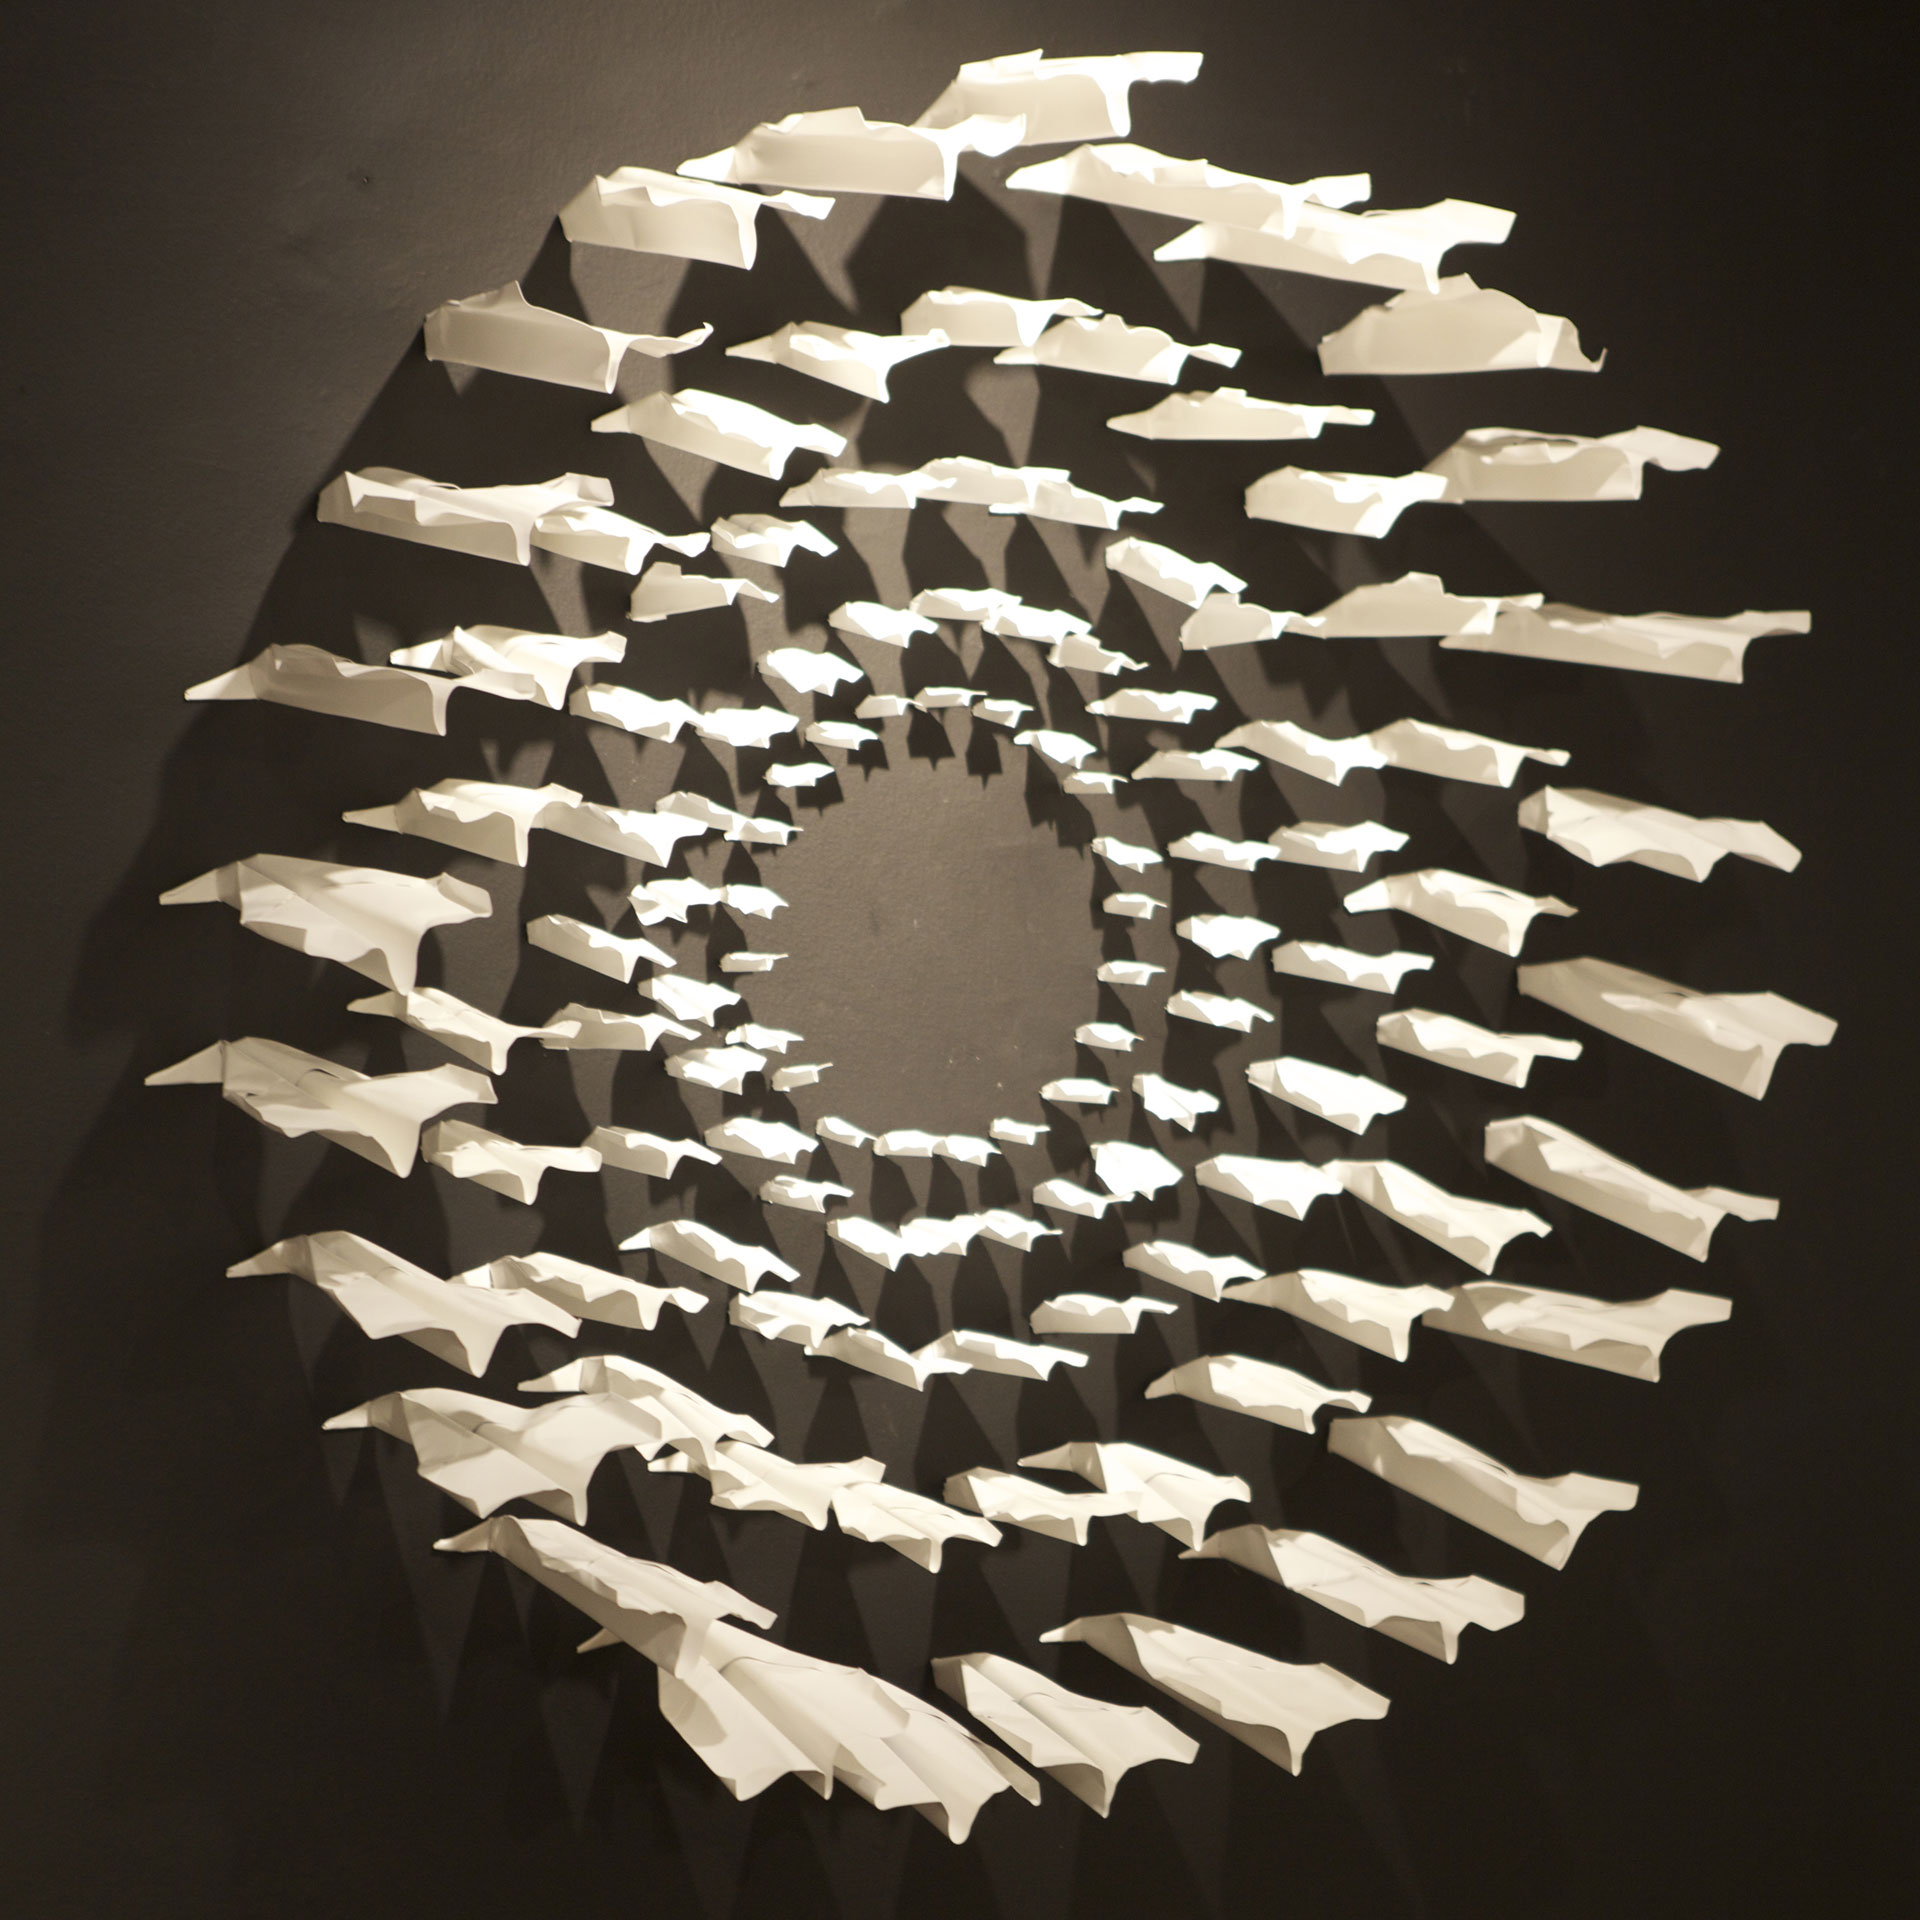 110 PAPER PLANES SIMULTANEOUSLY HITTING THE WALL